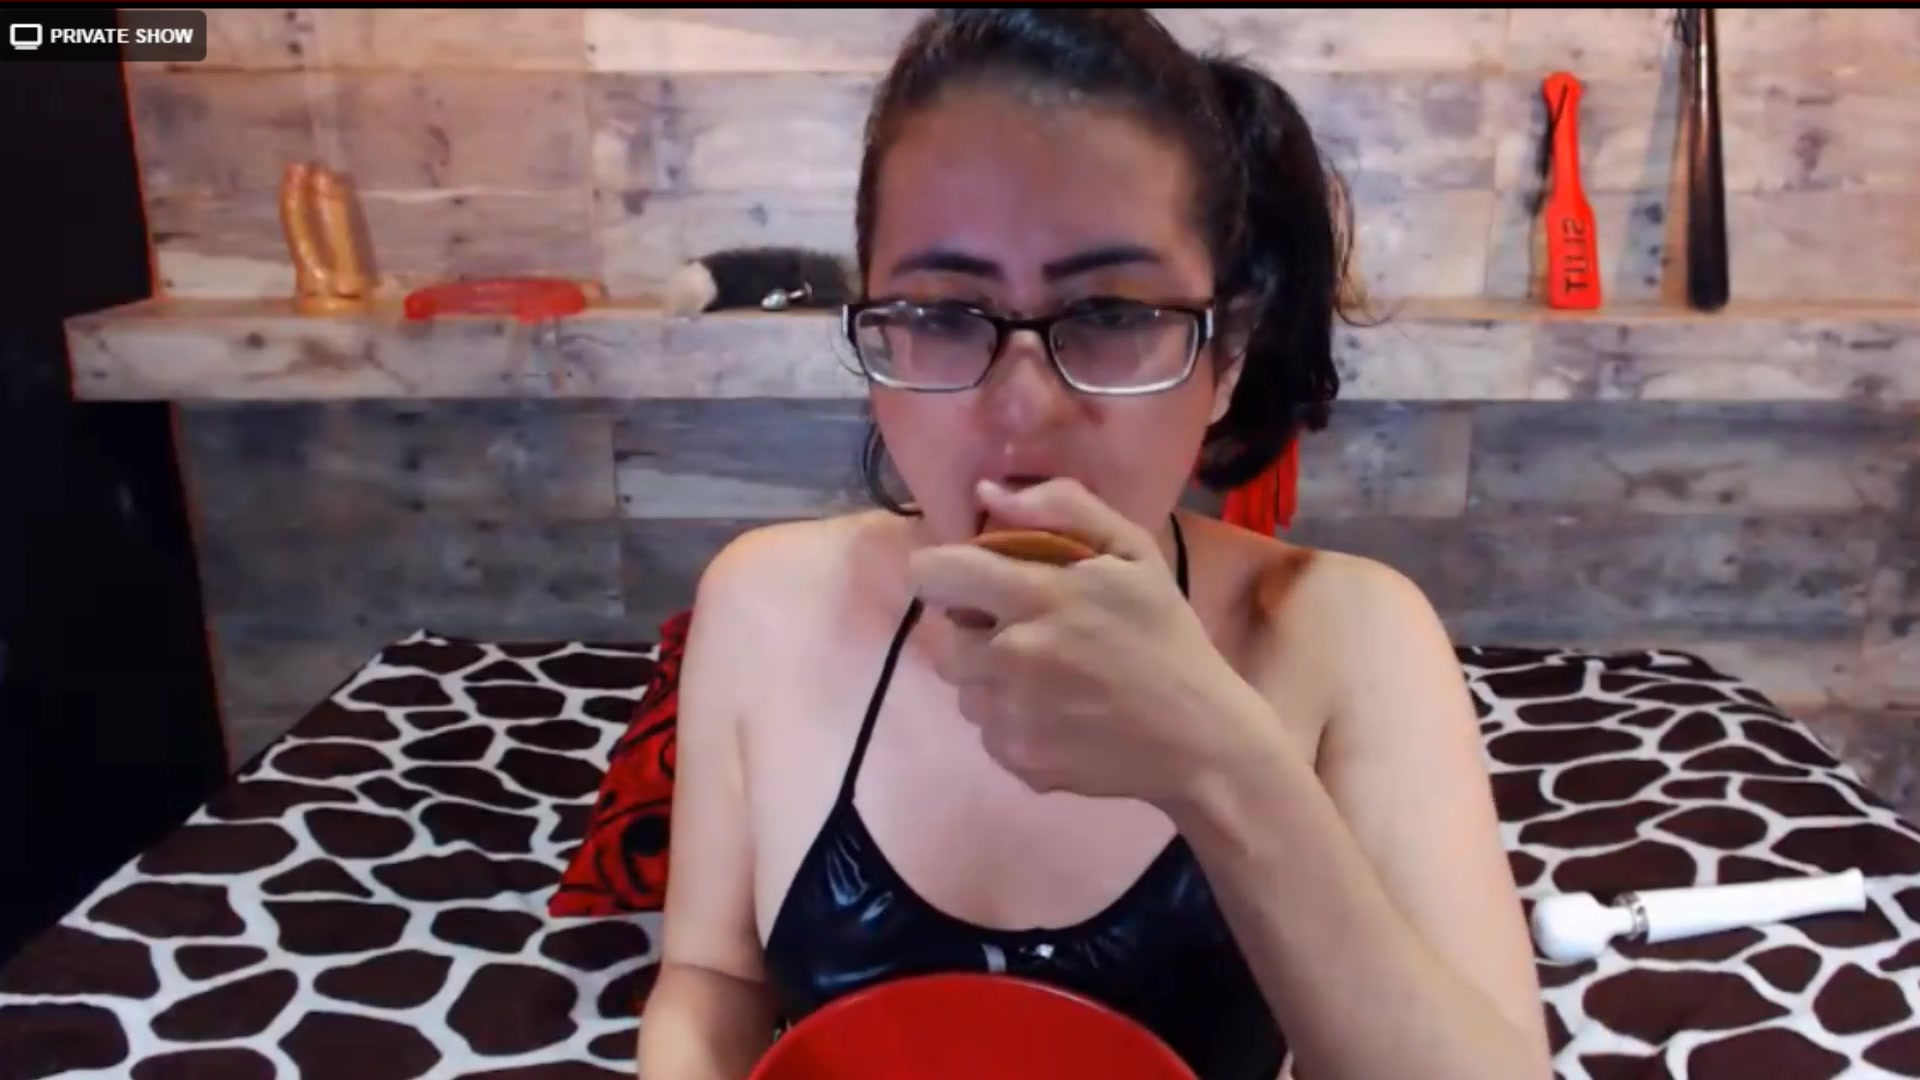 Camgirl vomits in bowl